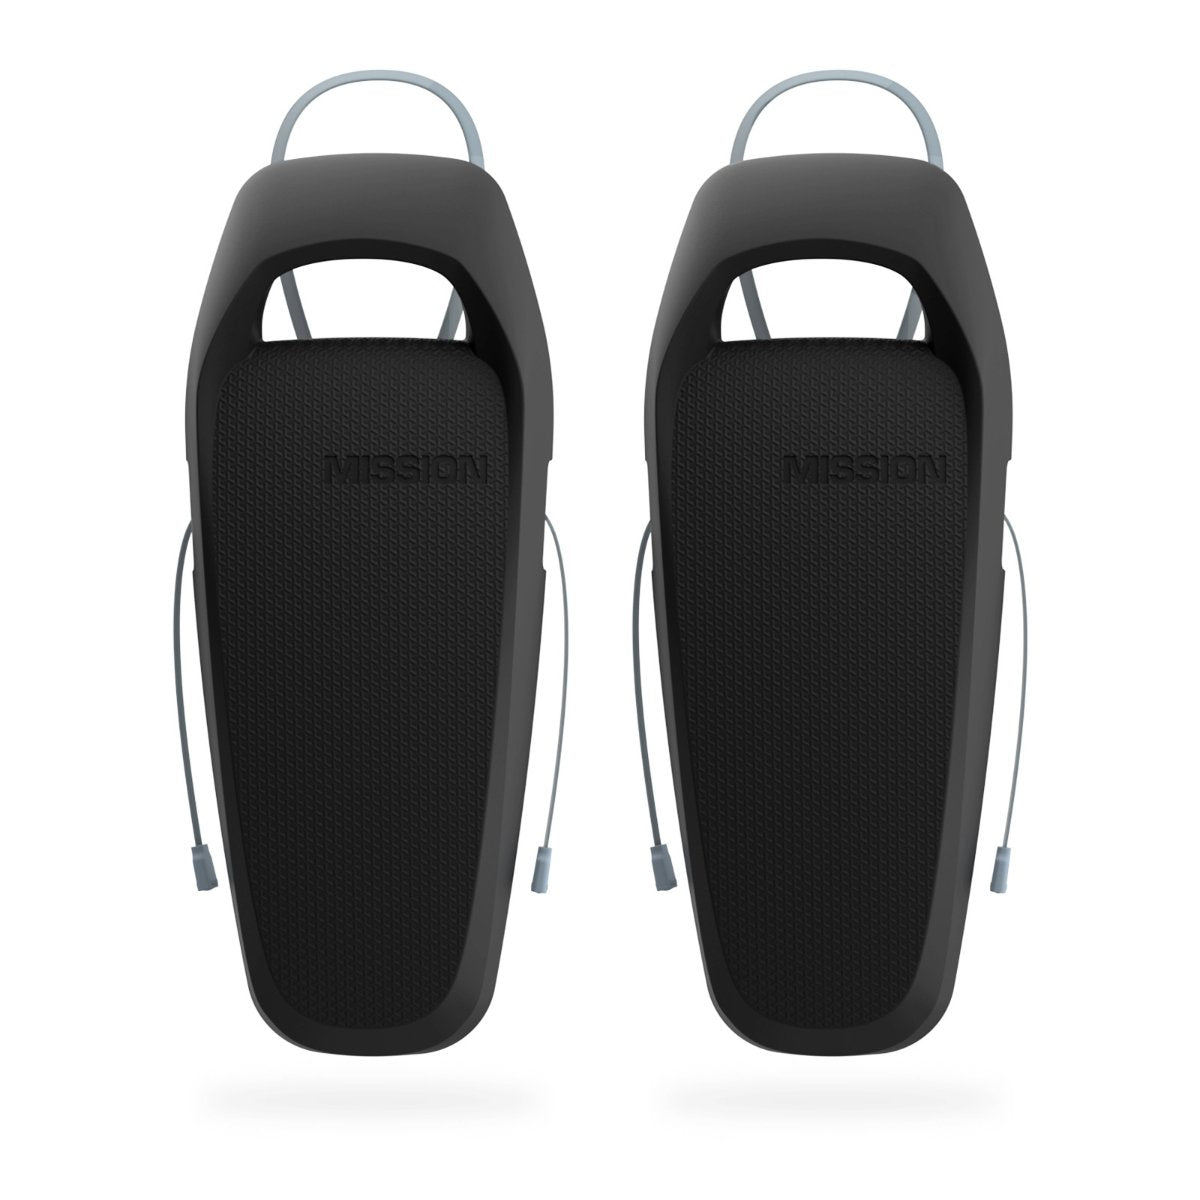 Mission Sentry 2.0 Fenders 2 PACK - BoardCo